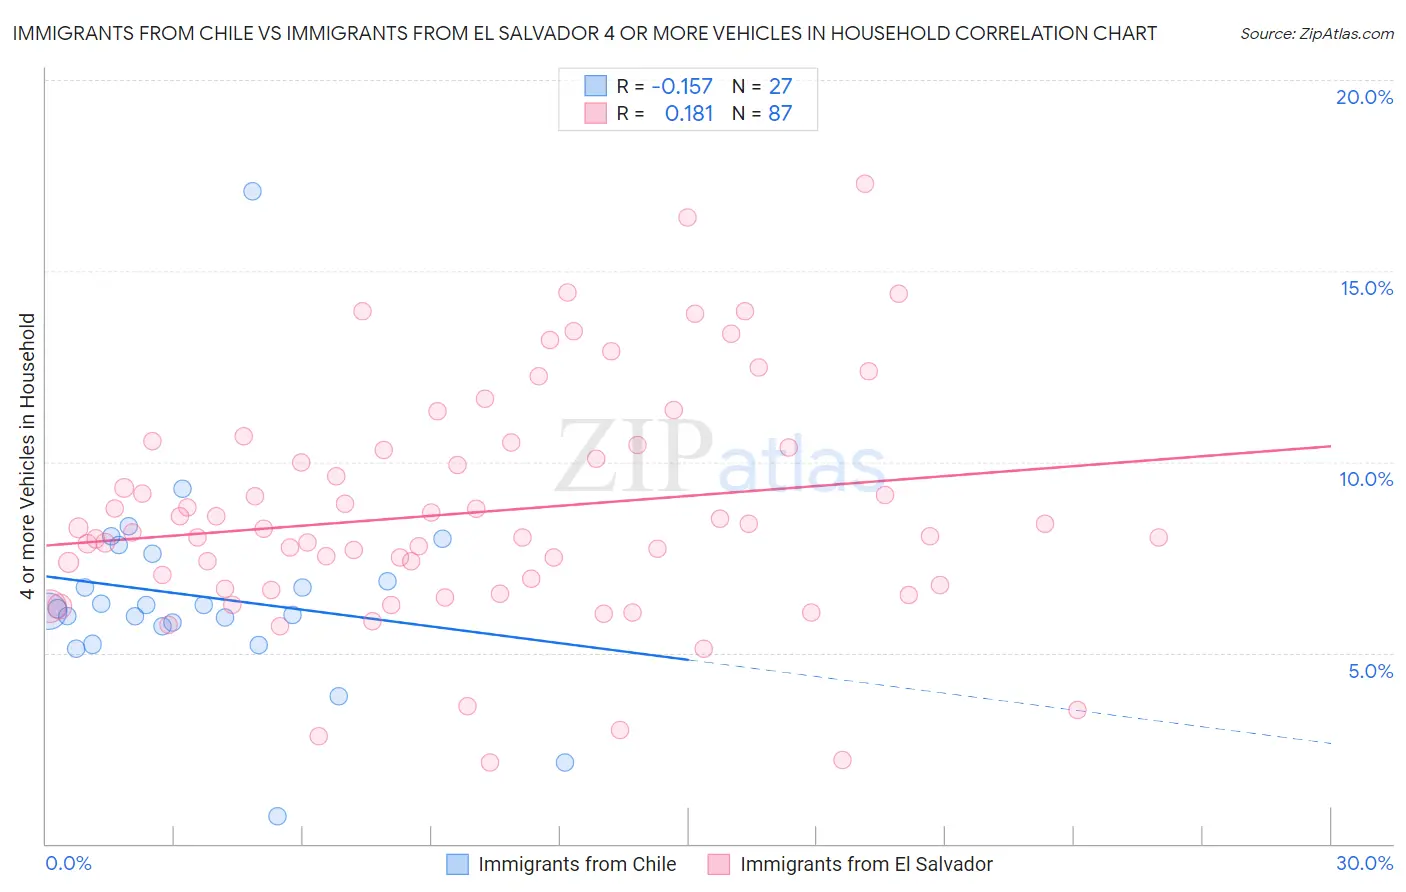 Immigrants from Chile vs Immigrants from El Salvador 4 or more Vehicles in Household